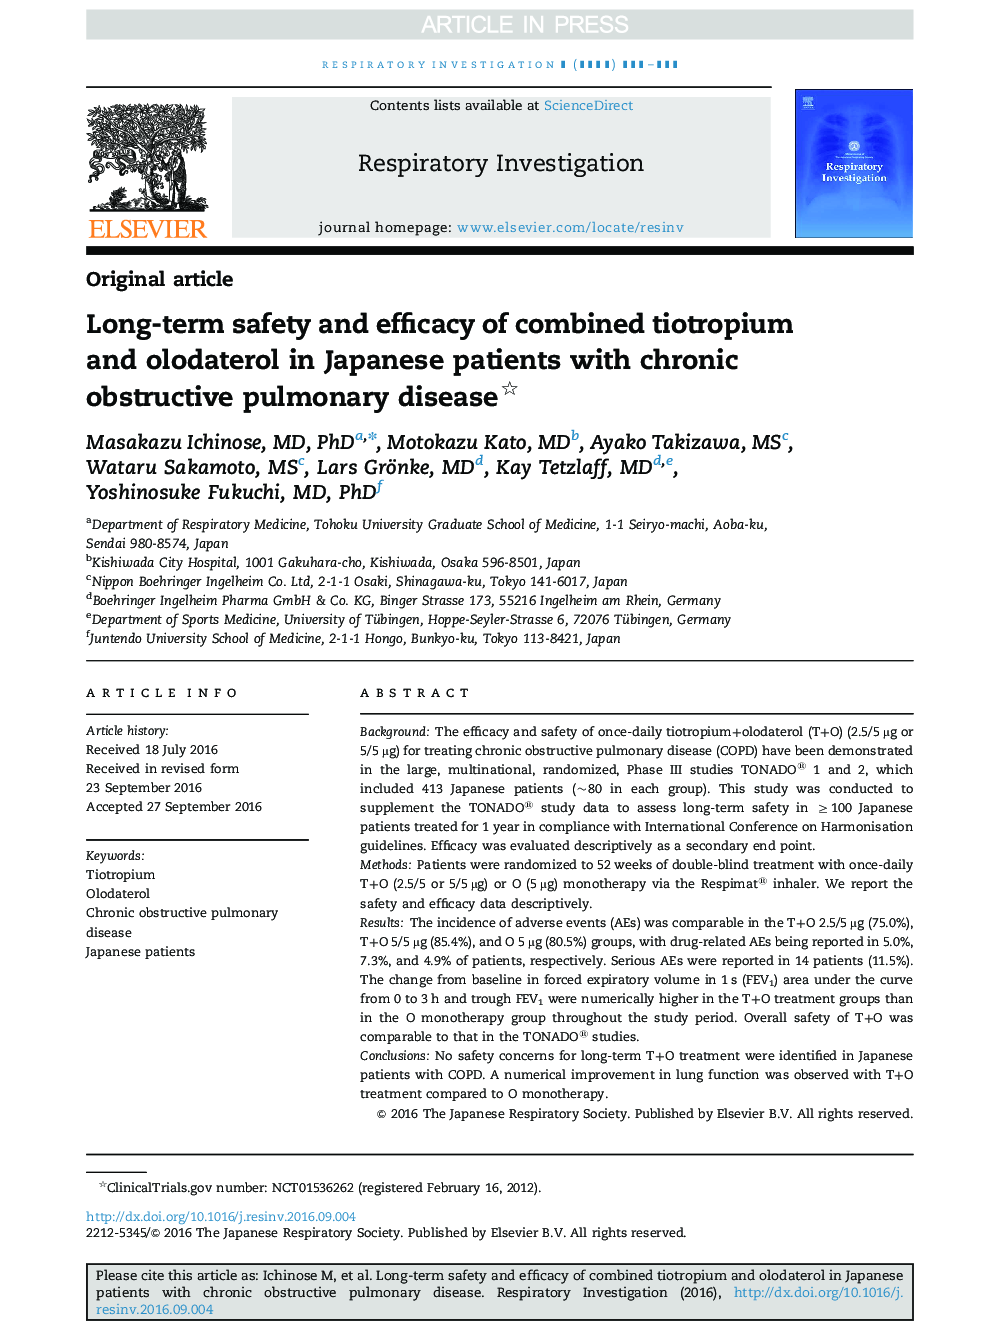 Long-term safety and efficacy of combined tiotropium and olodaterol in Japanese patients with chronic obstructive pulmonary disease